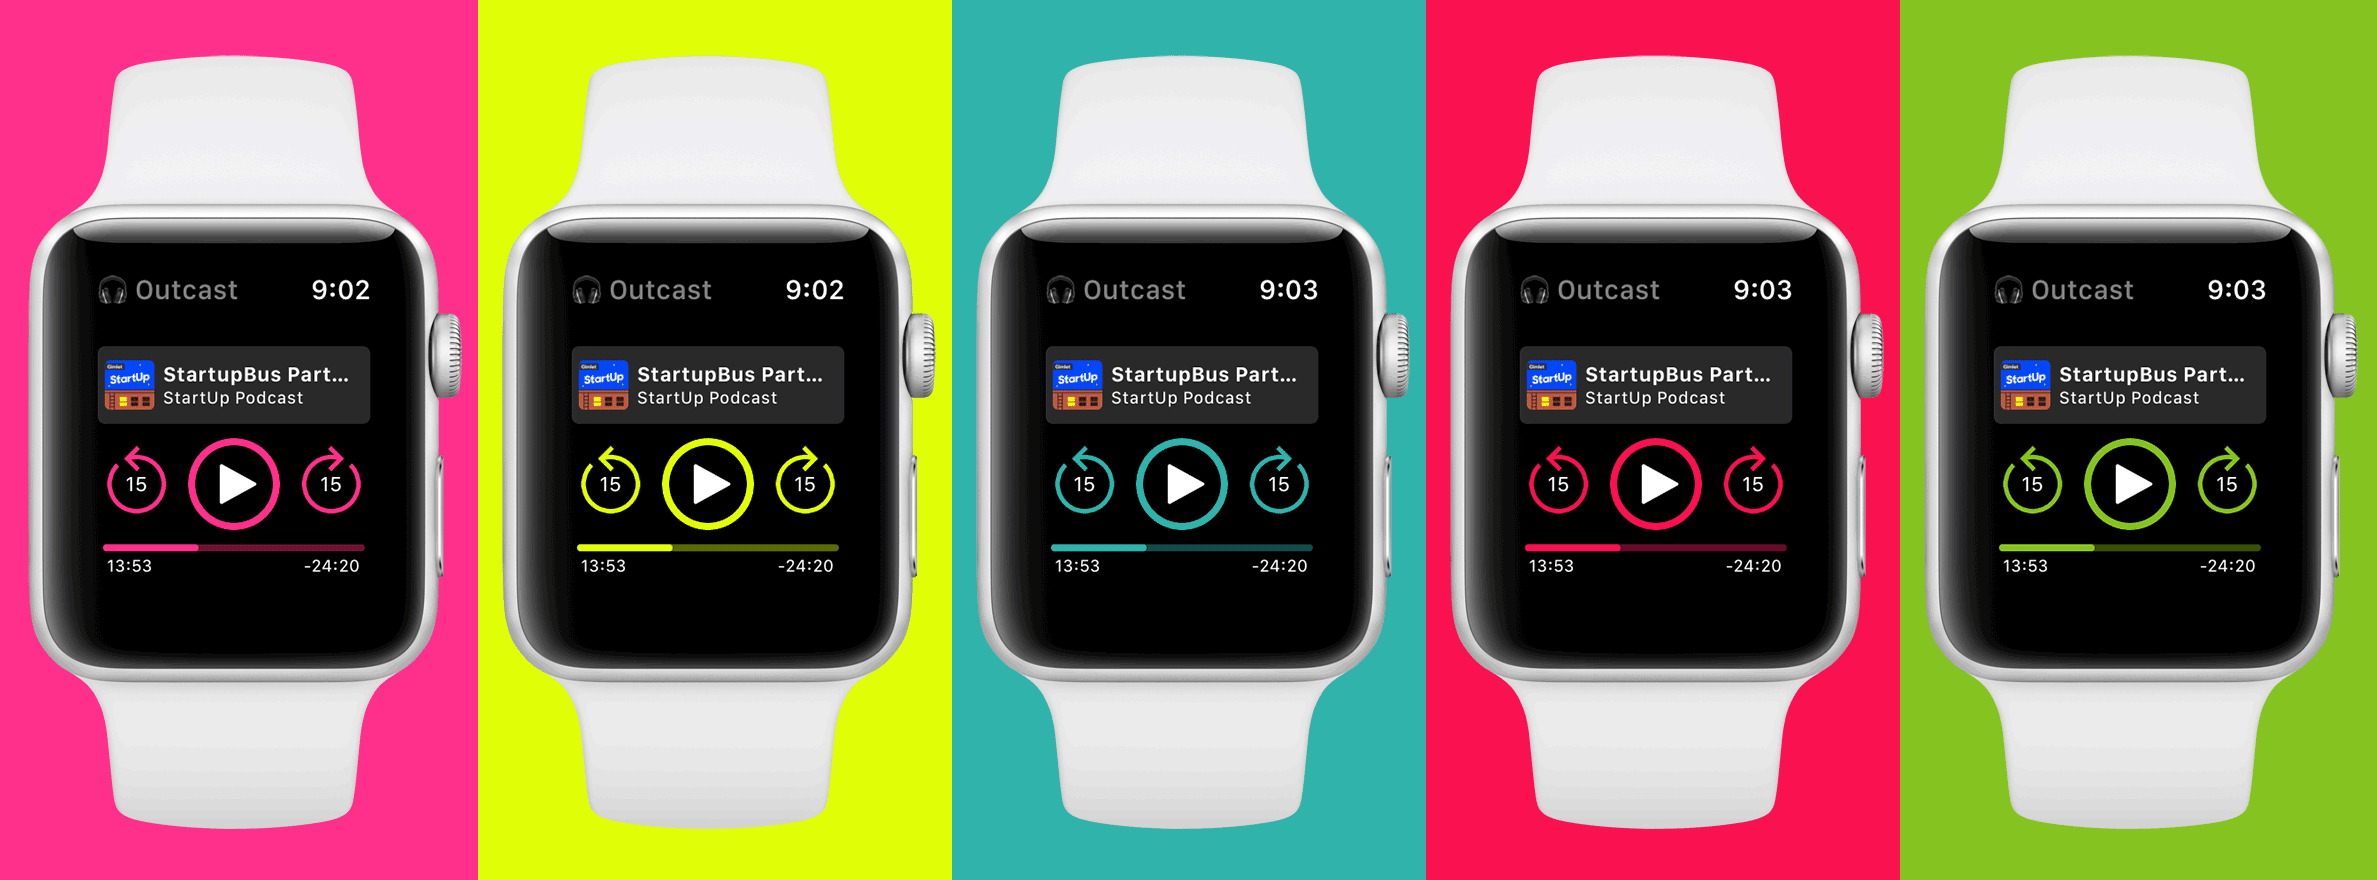 Outcast for Apple Watch